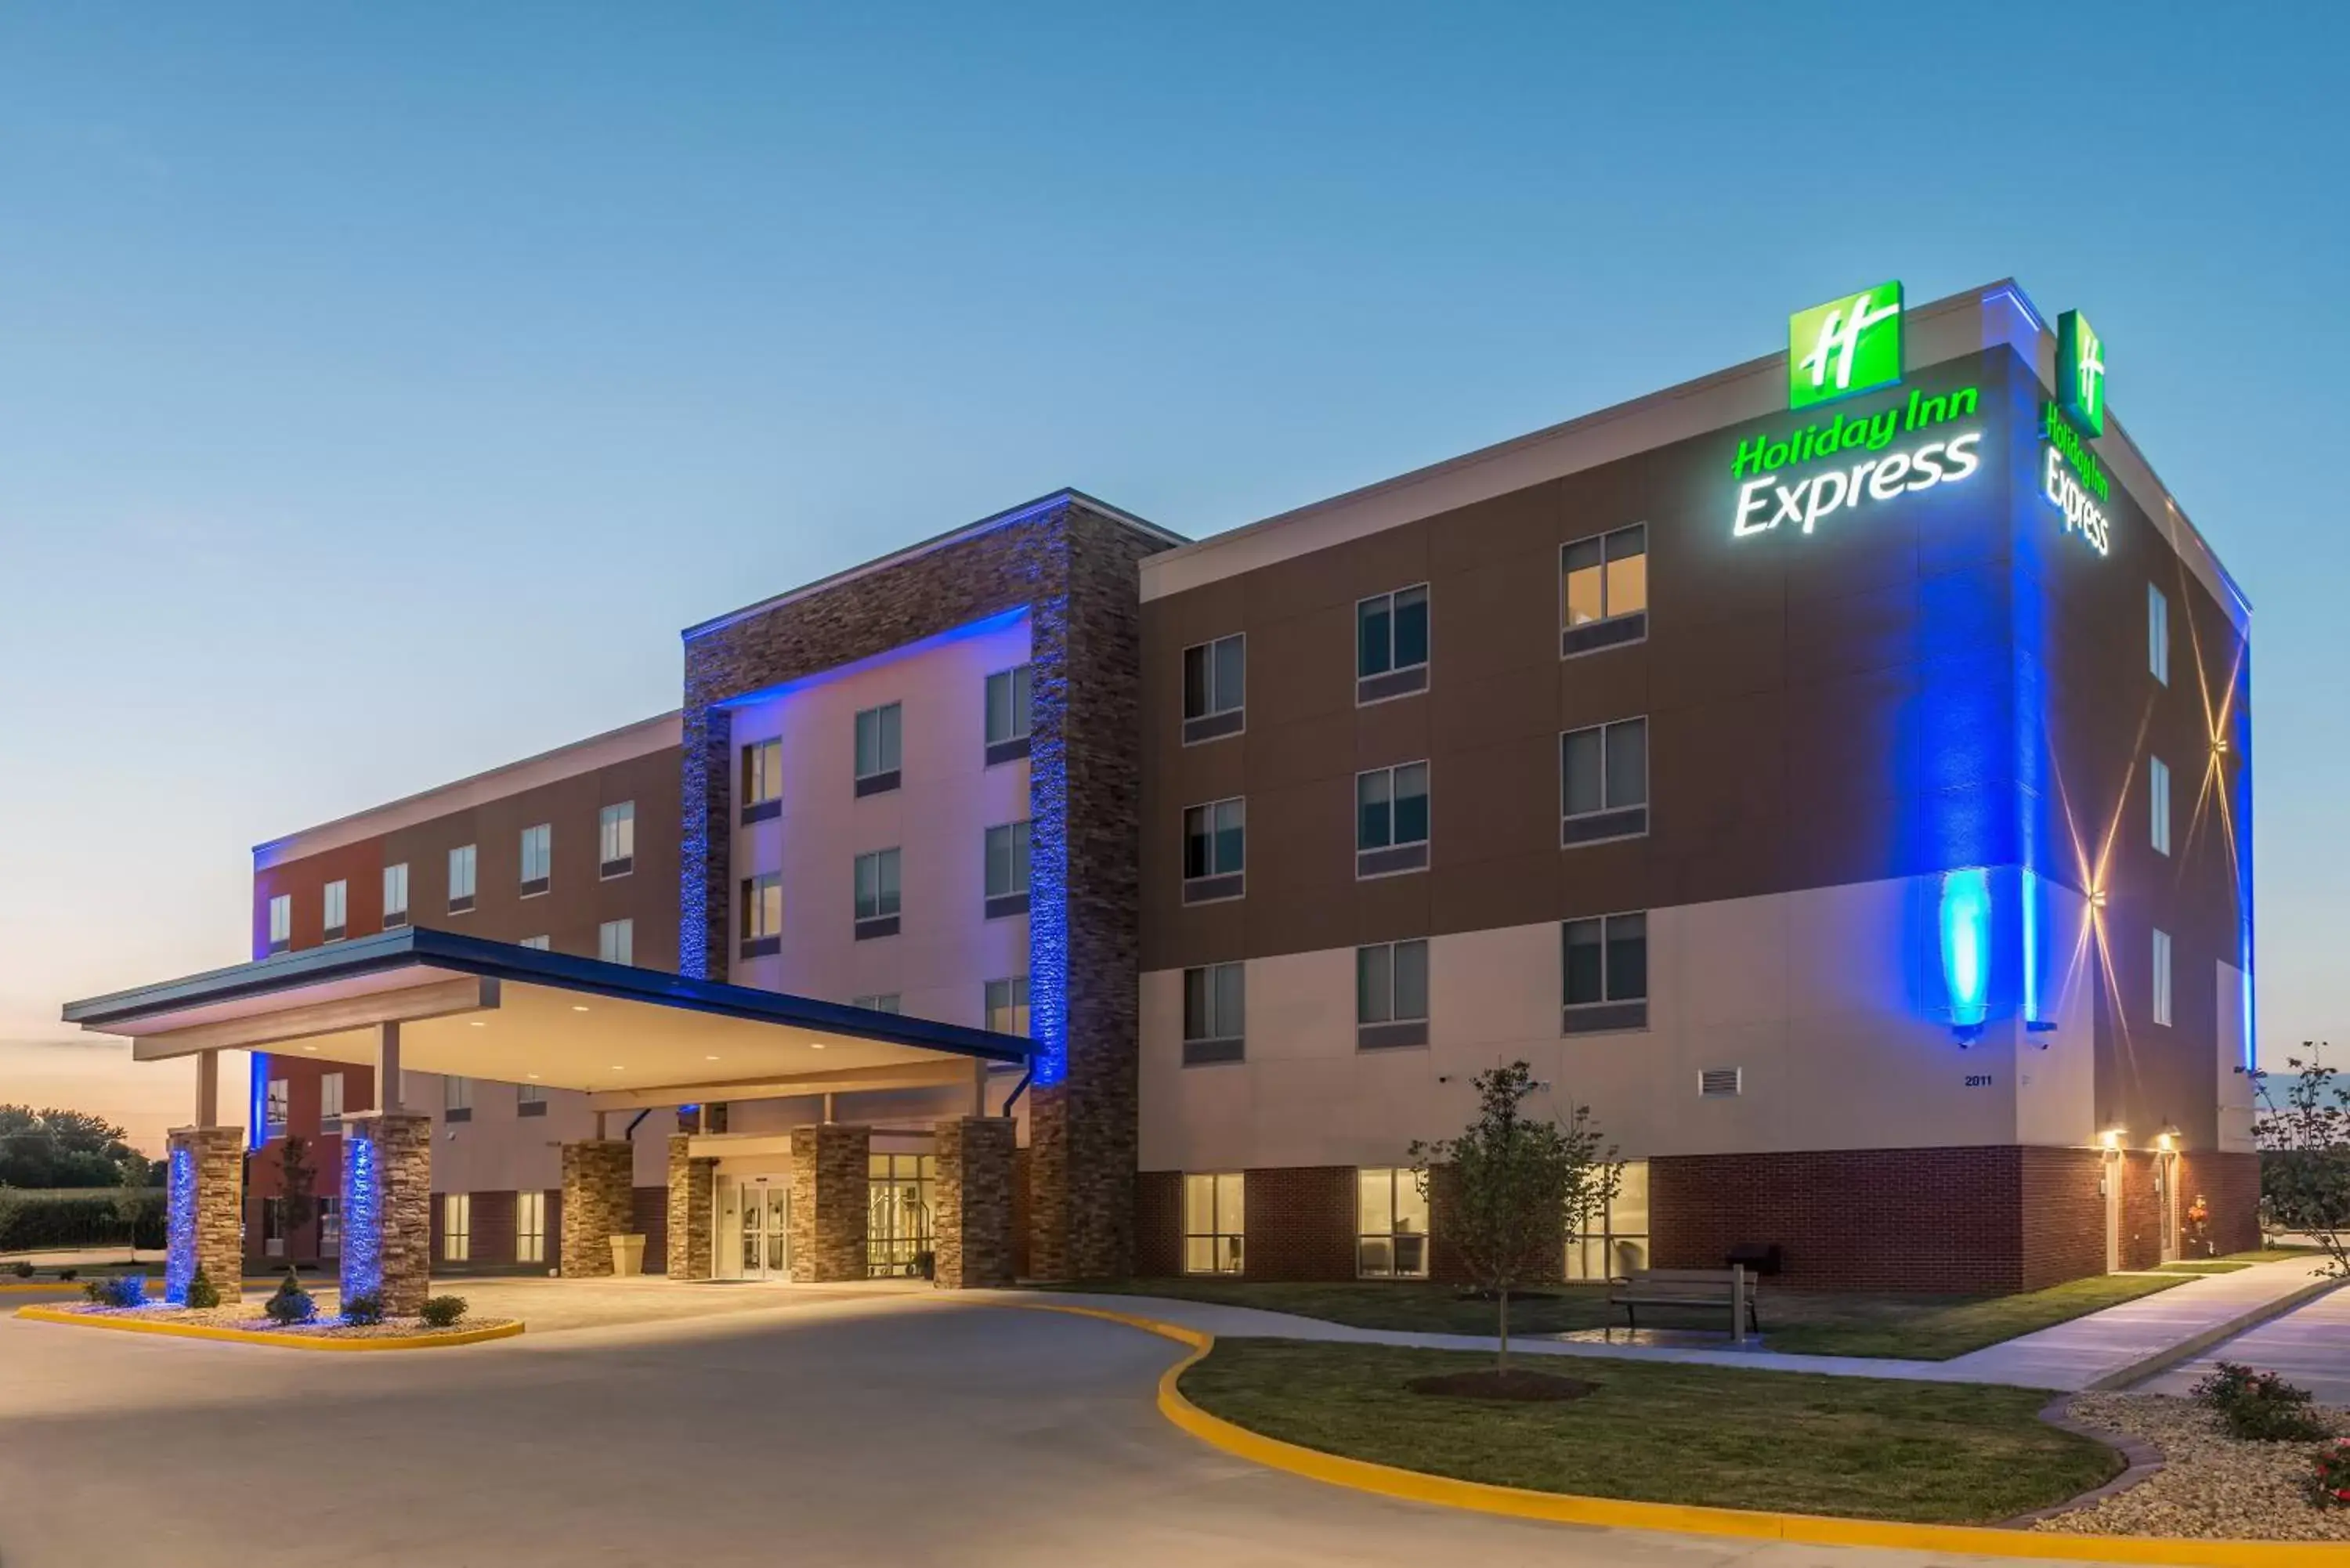 Property building in Holiday Inn Express Troy, an IHG Hotel